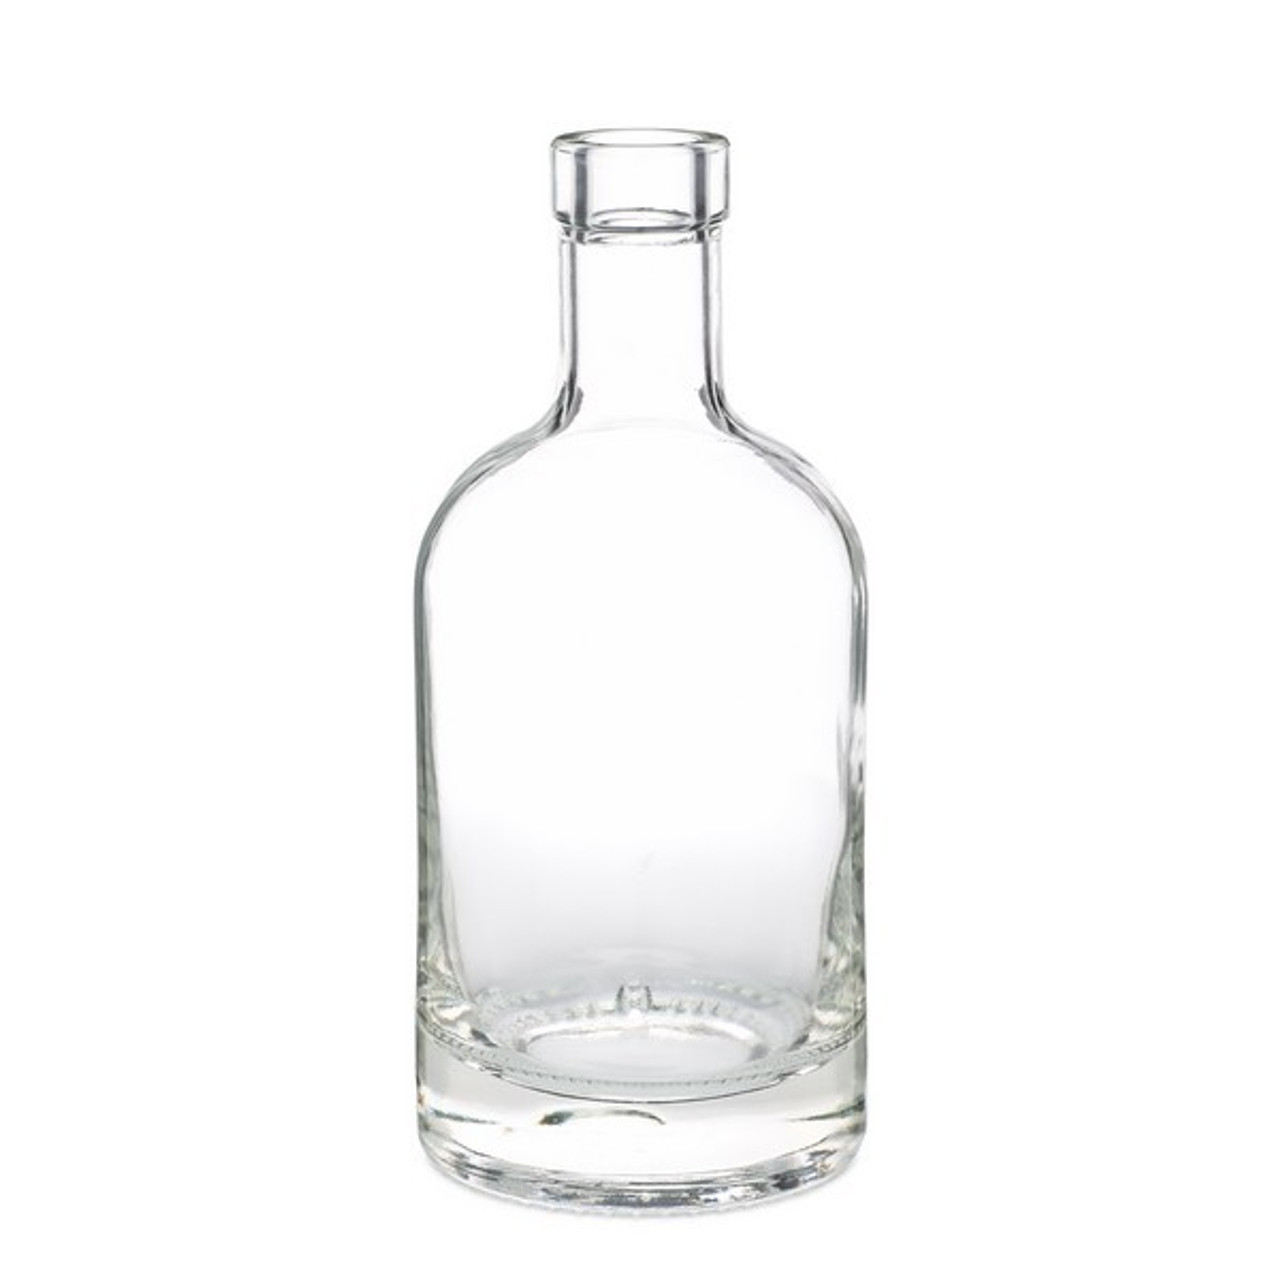 750 ml, 25 oz Clear Glass Curvy Milan Liquor Bottle with Bar Top and Cork  Bottle